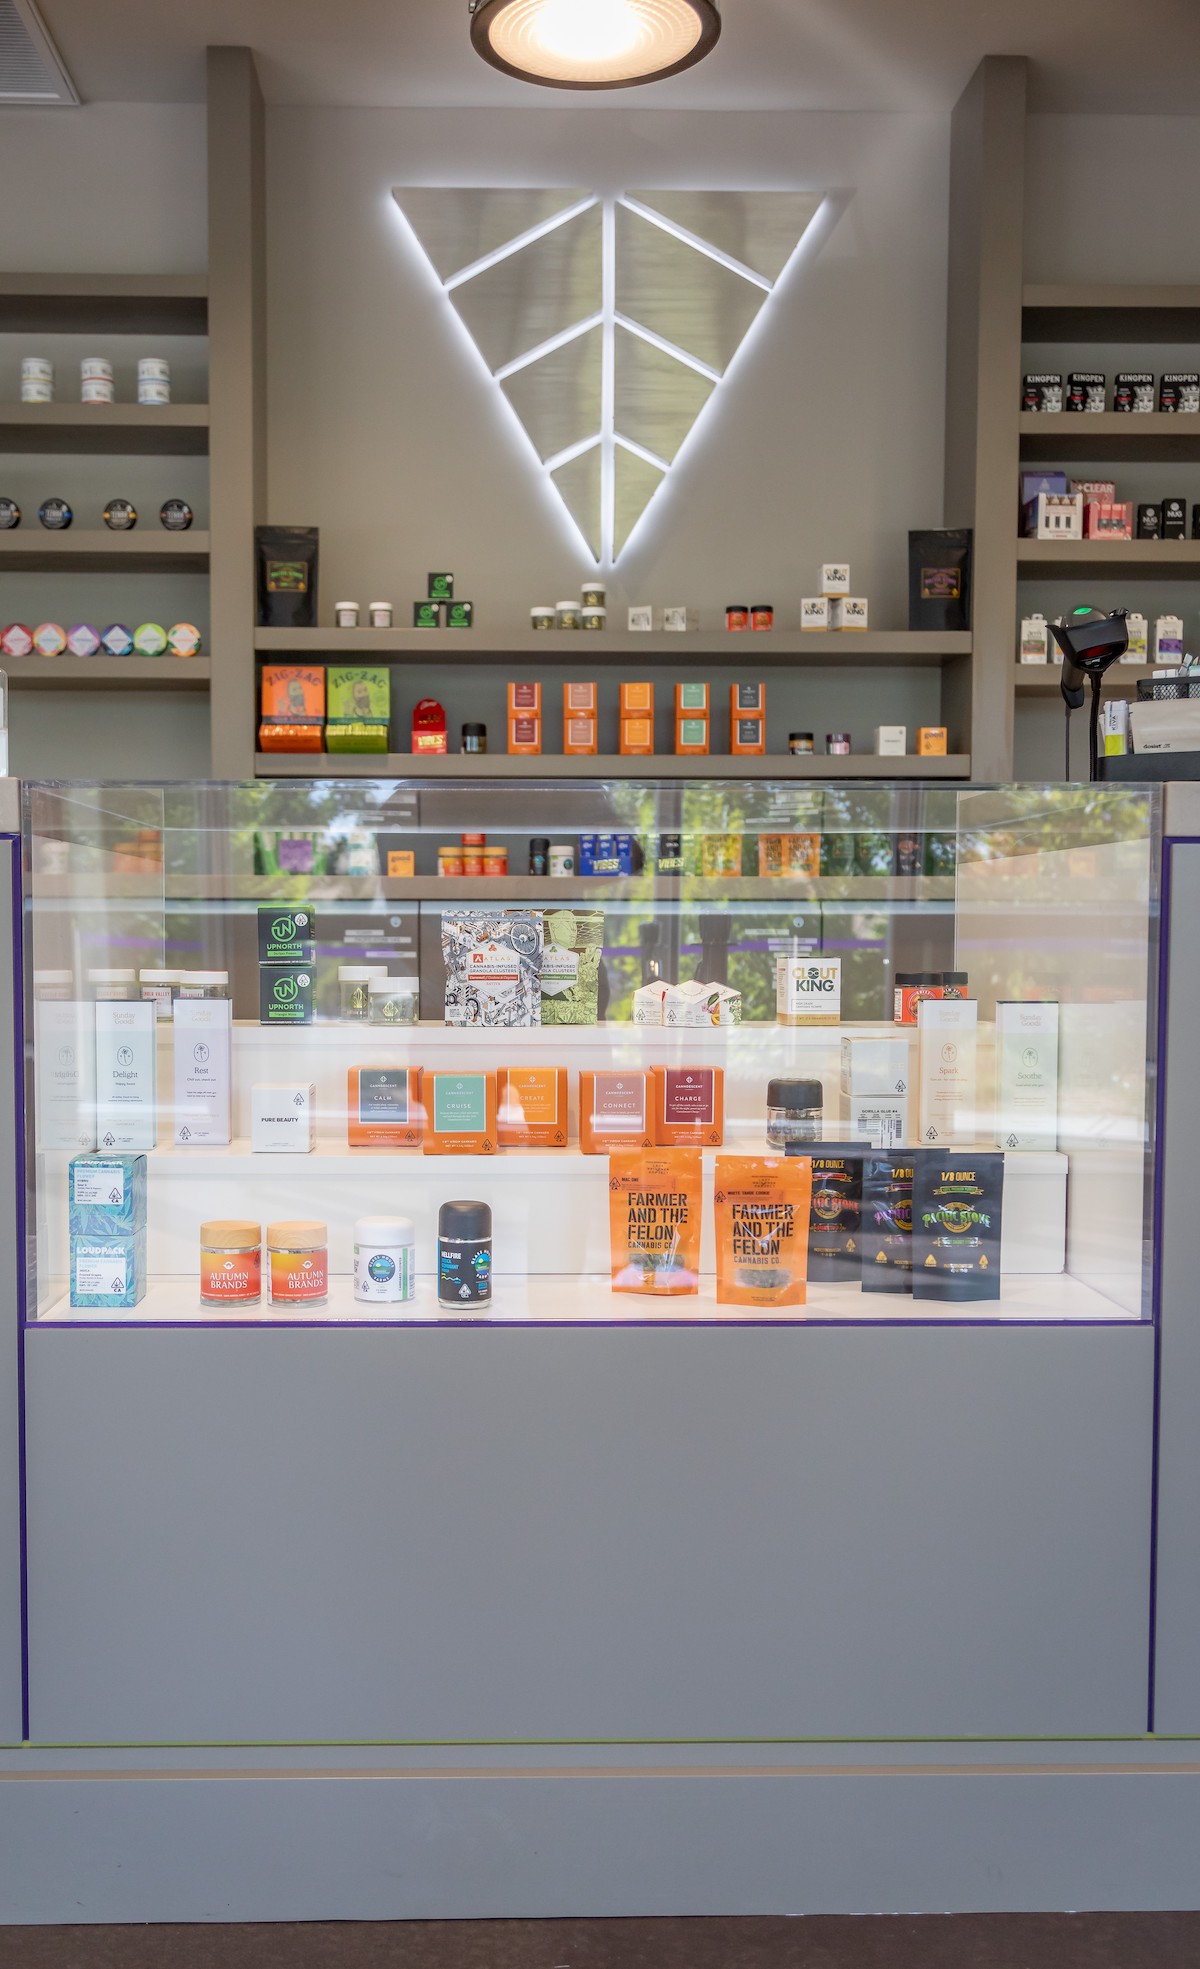 dispensary display cases embedded into a white wall with an upside down geometric triangle logo on thee wall